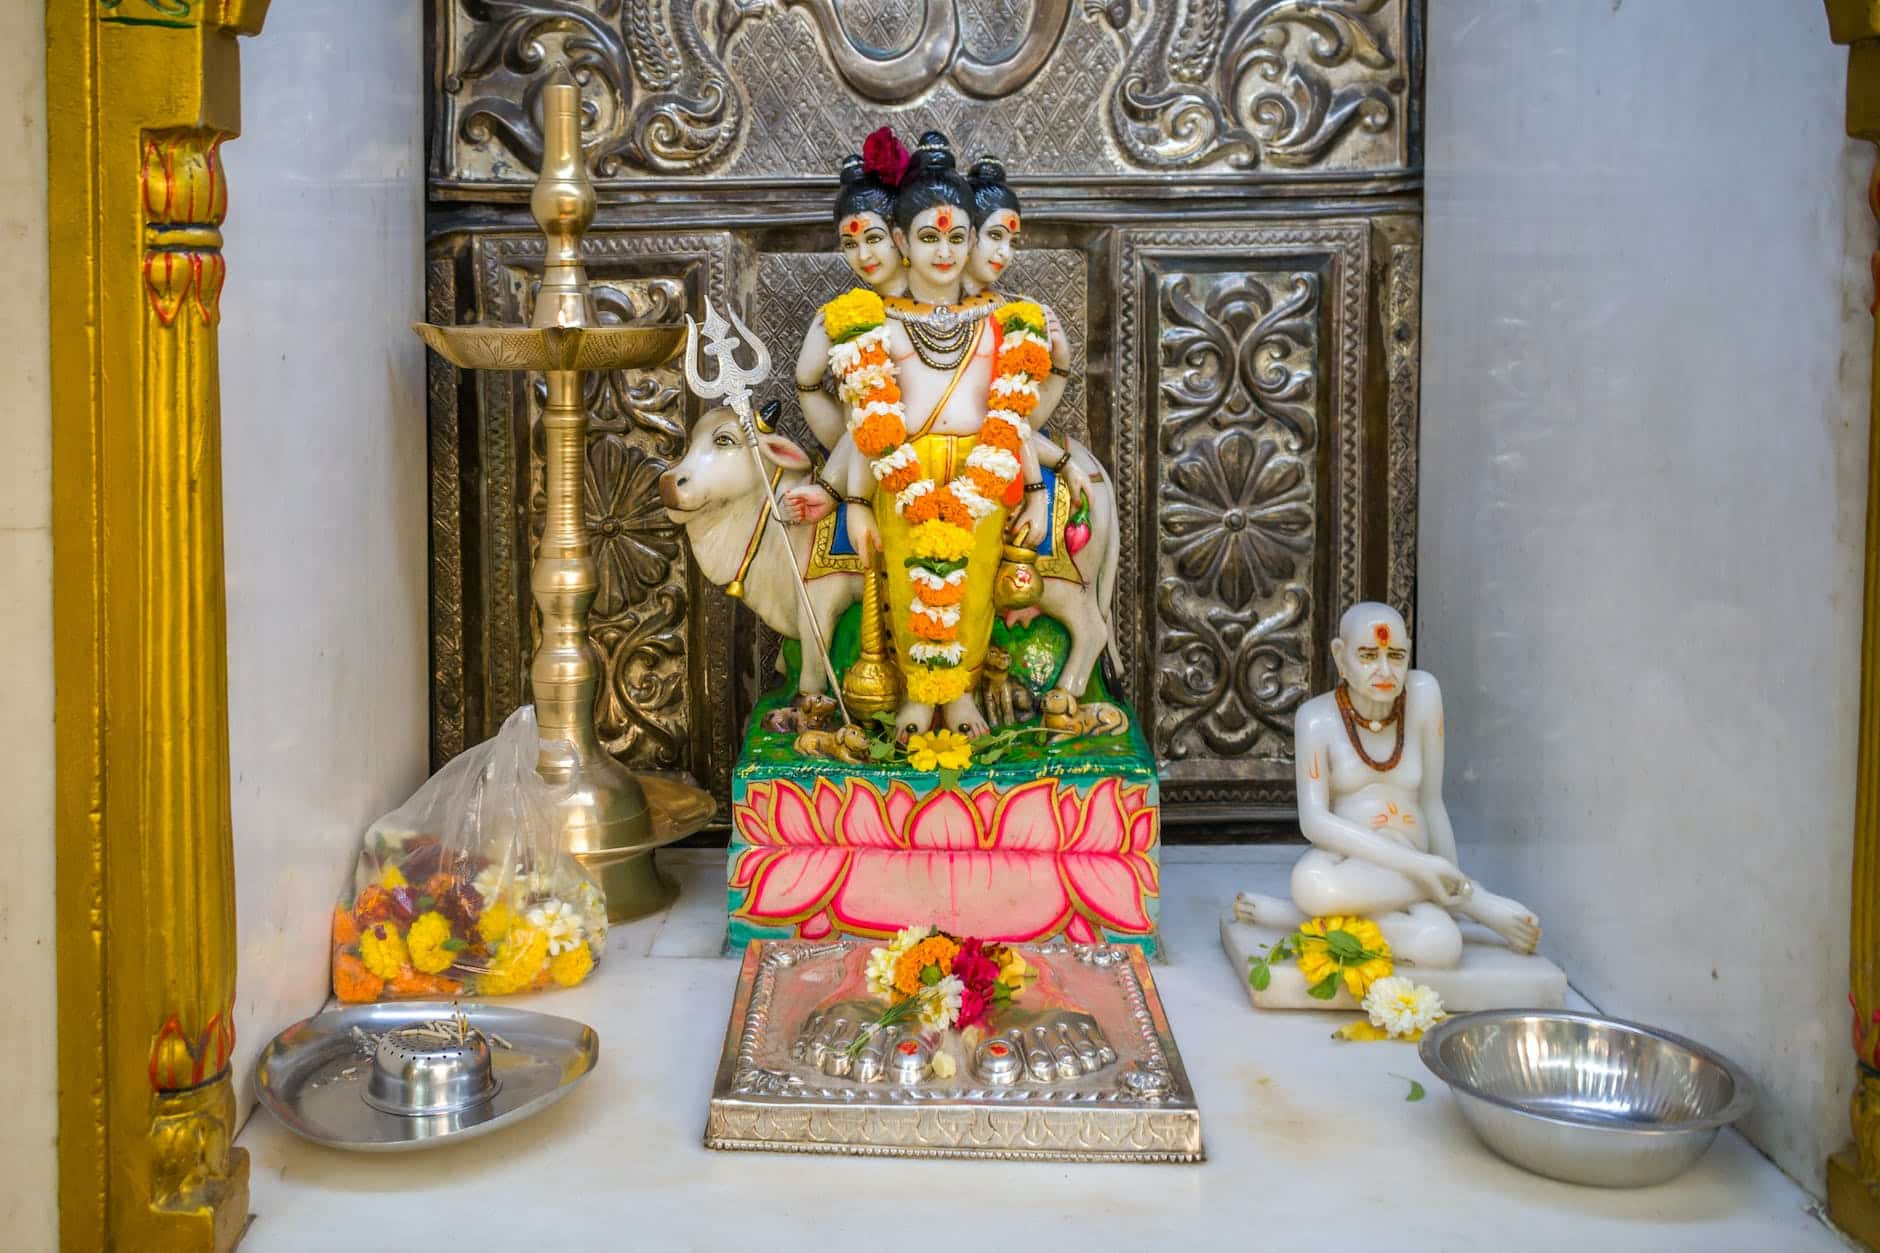 a statue of lord dattatreya at a hindu temple for the festival of datt jayanti in mumbai india